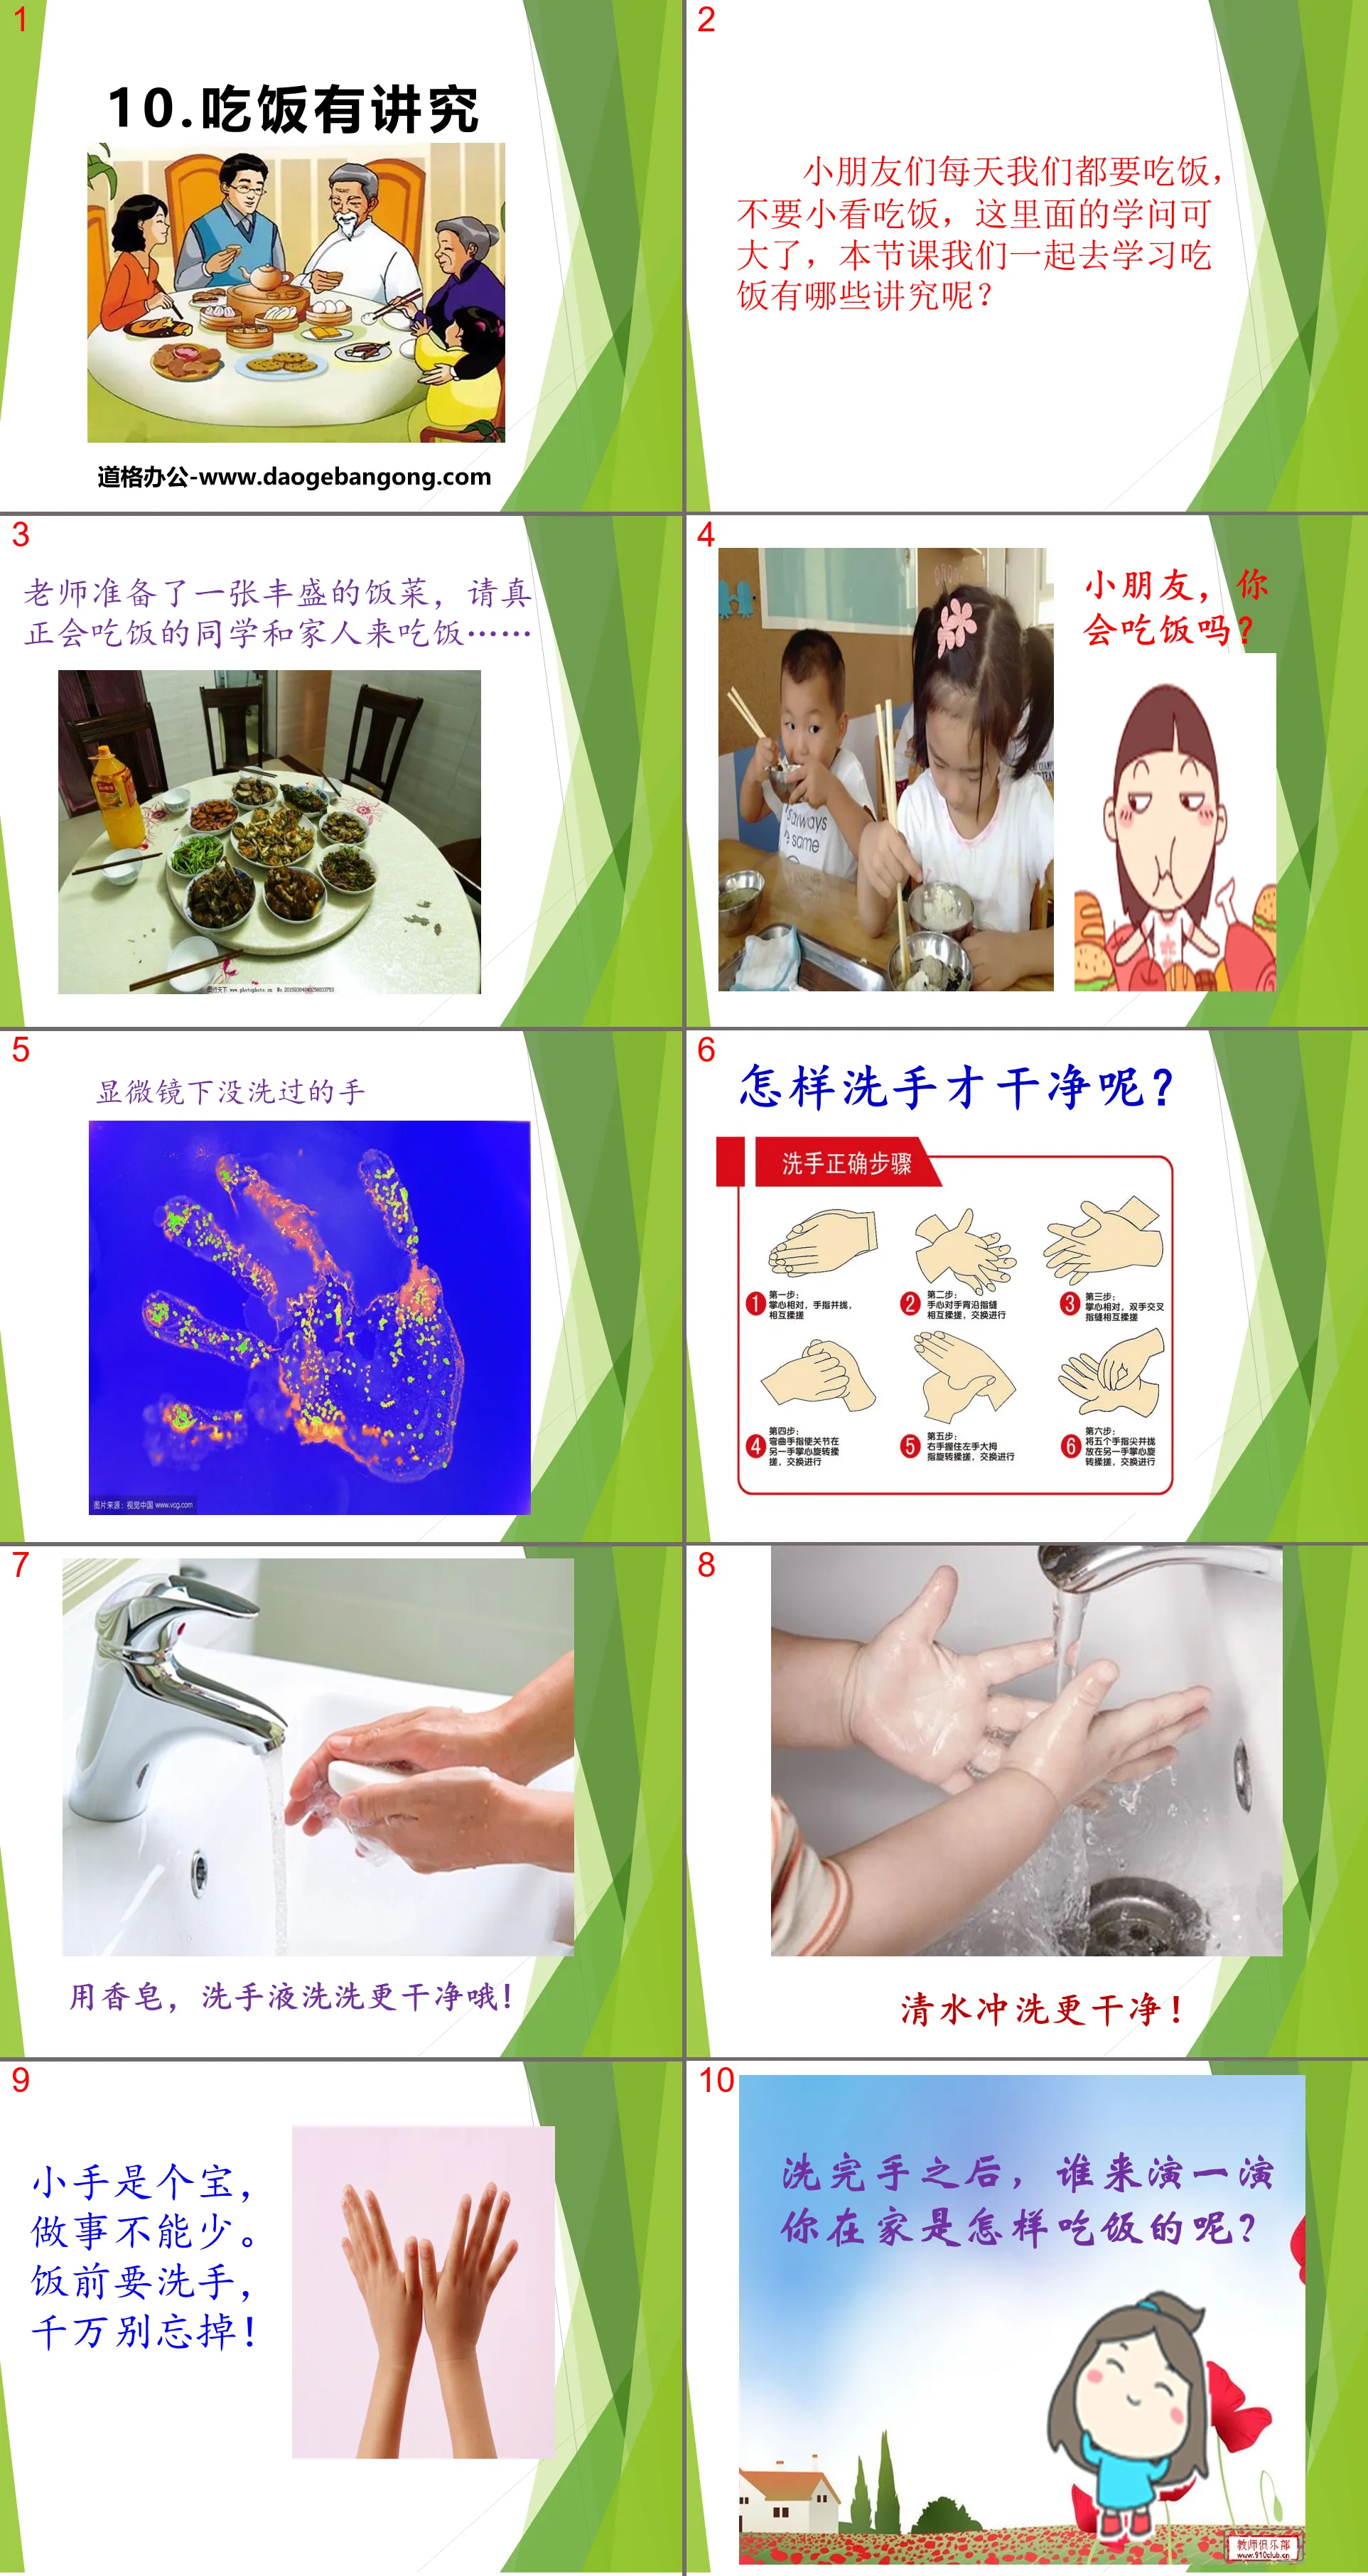 "Be careful about eating" PPT courseware